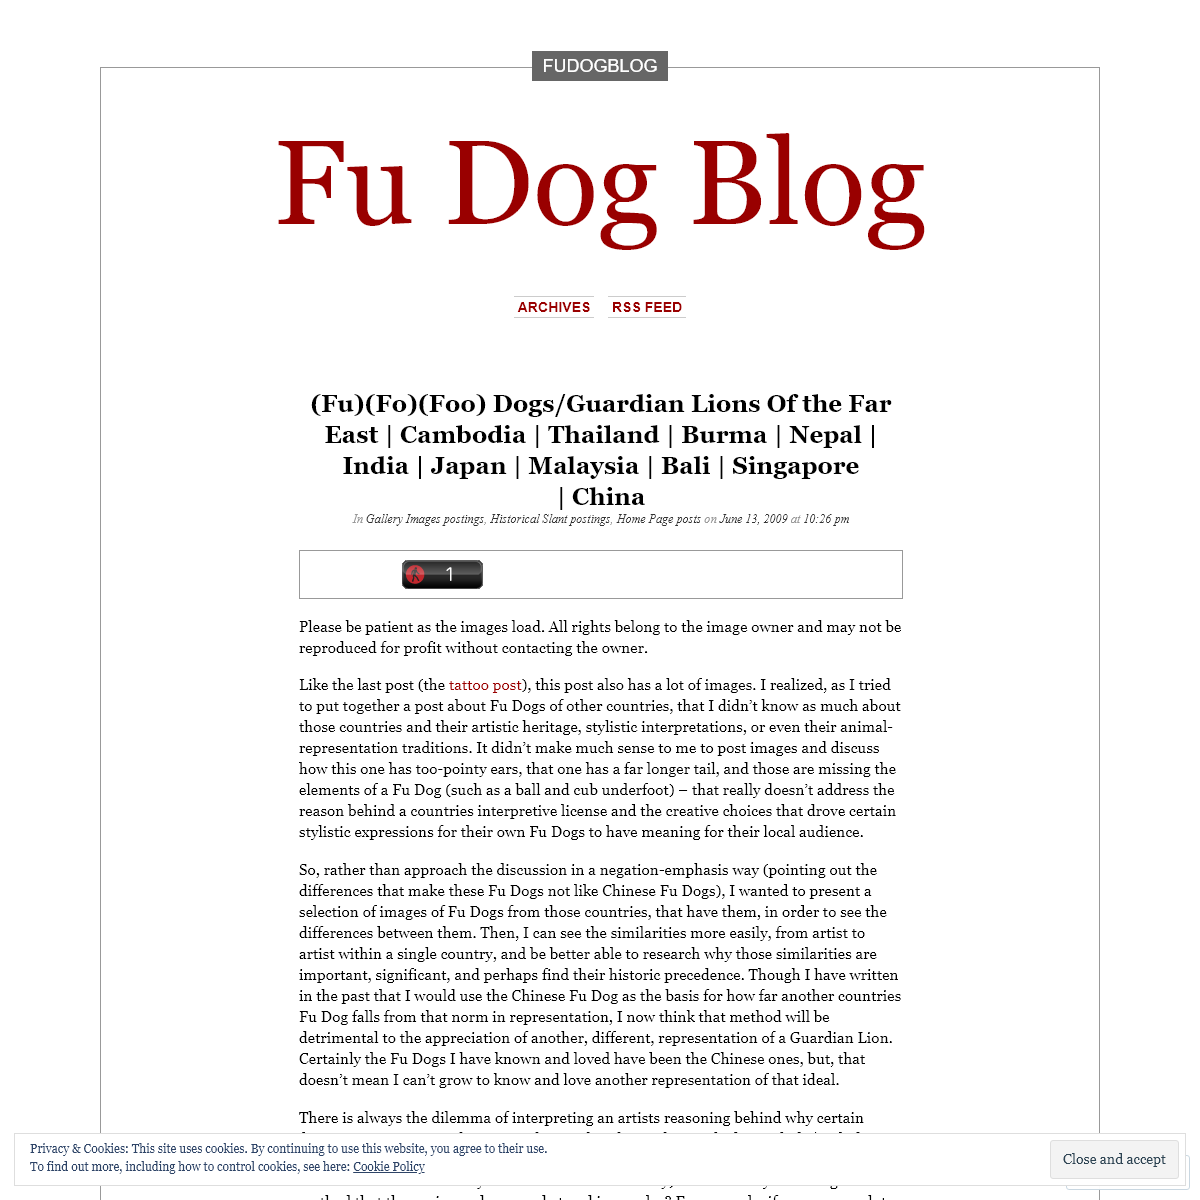 A complete backup of https://fudogblog.wordpress.com/2009/06/13/fufofoo-dogsguardian-lions-of-the-far-east-cambodia-thailand-bur